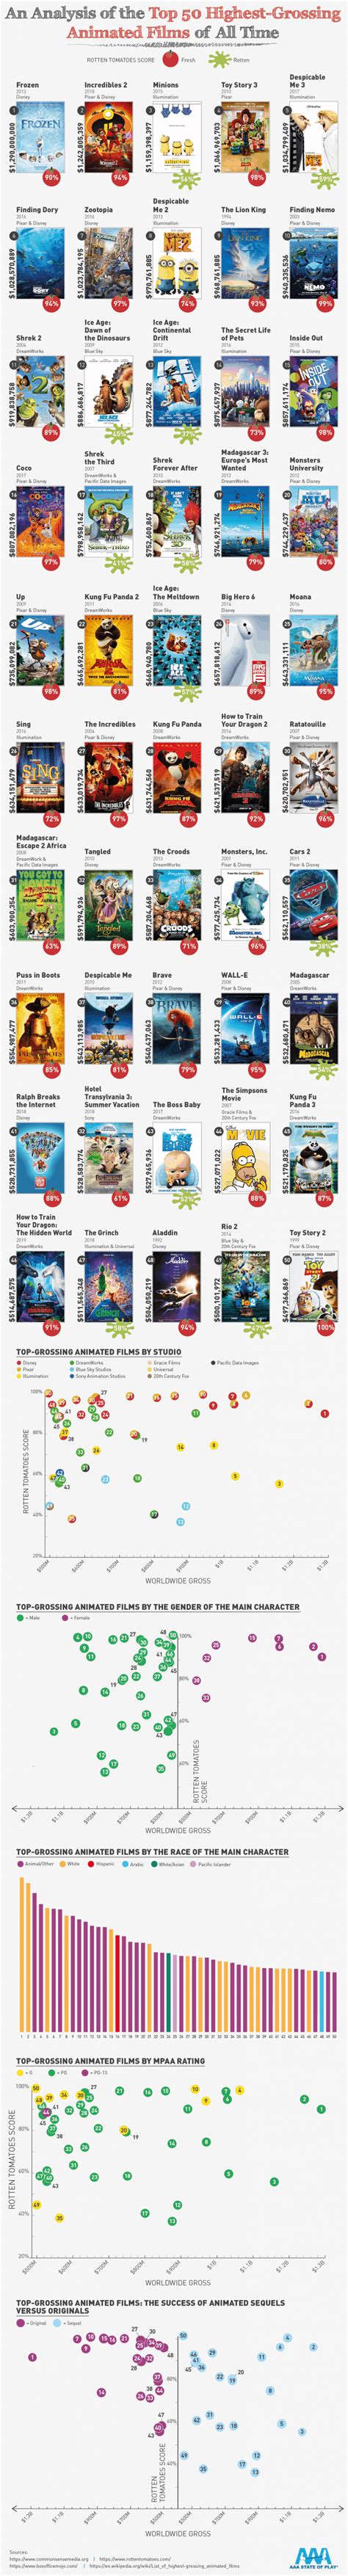 The Top 50 Animated Movies Of All Time Daily Infographic